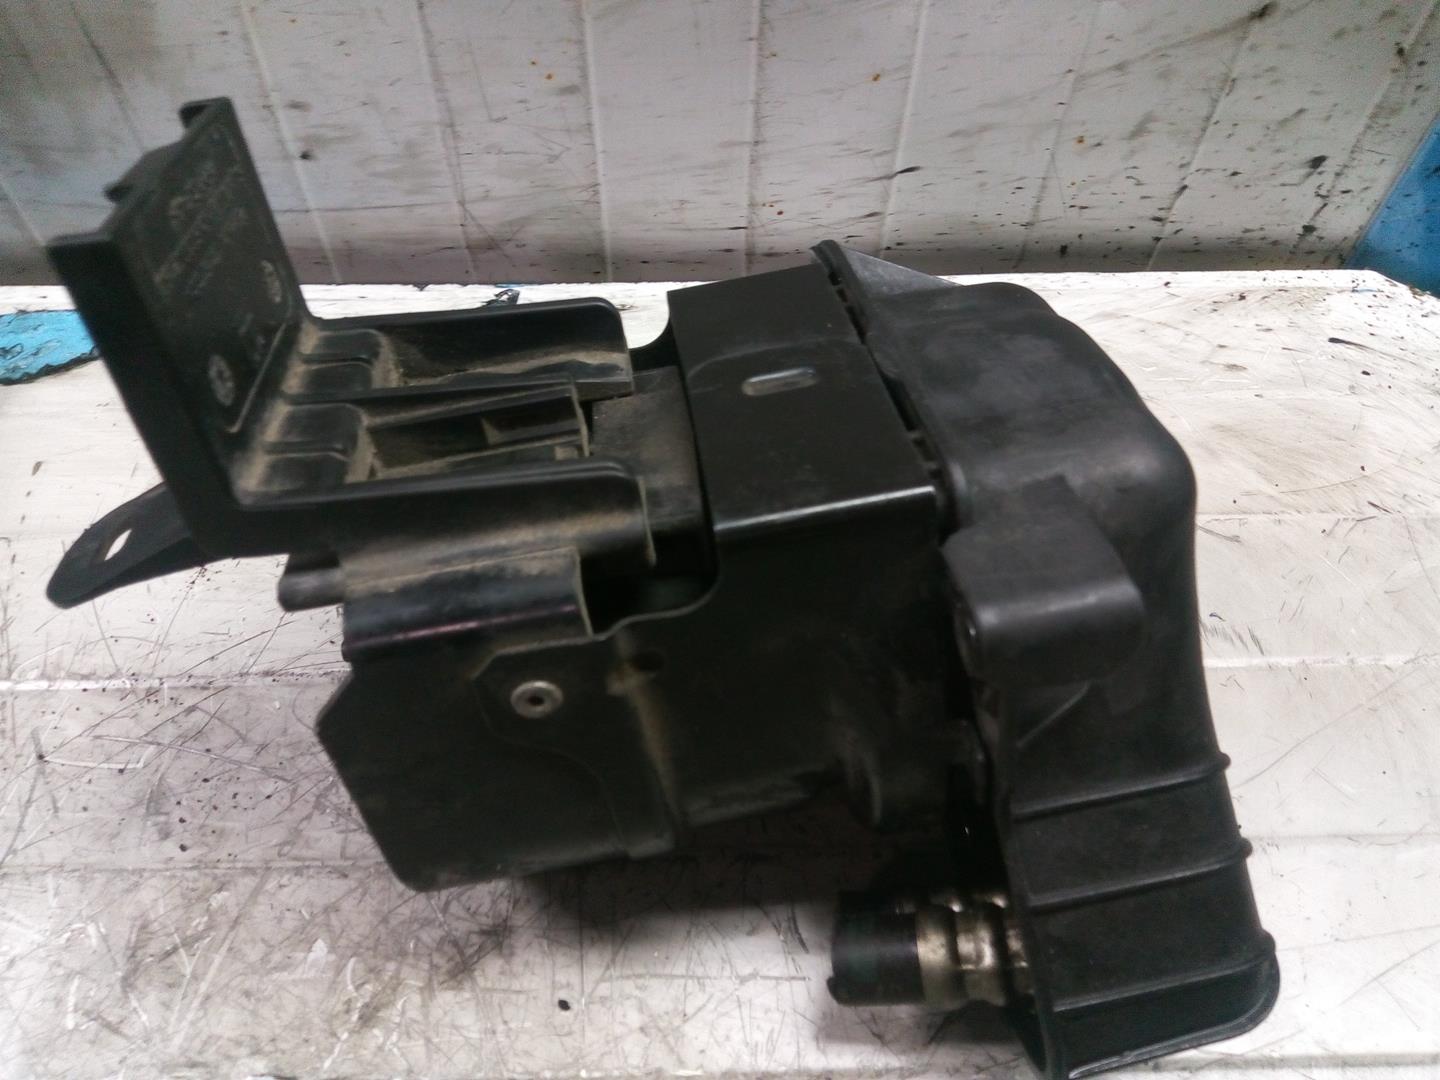 OPEL Meriva 1 generation (2002-2010) Other Engine Compartment Parts 13167334, 600002190 18551697